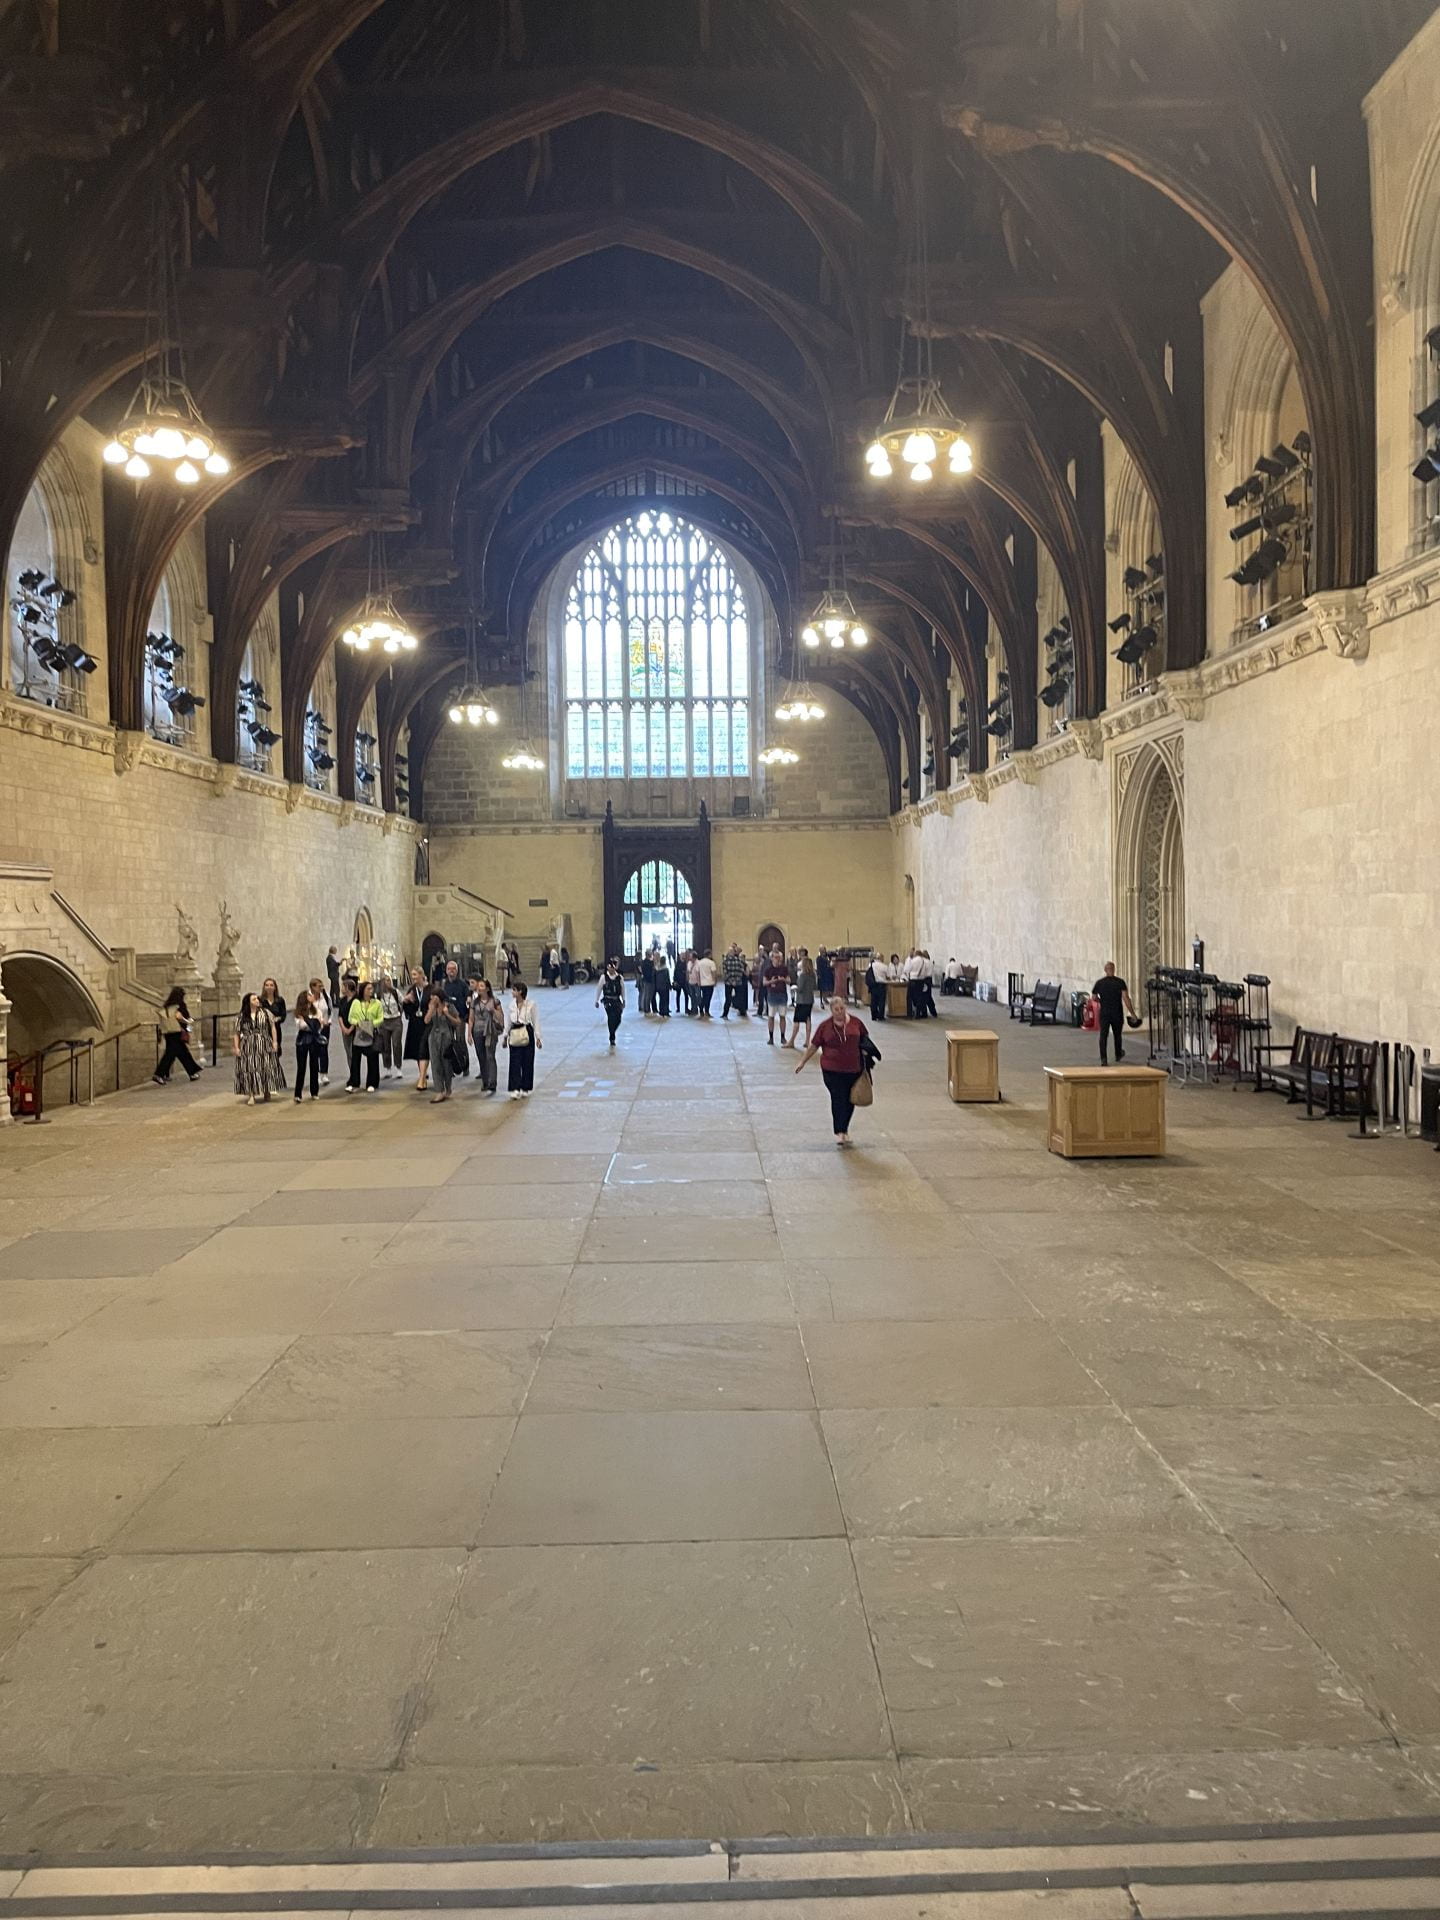 An image of Westminster Hall taken from one end to show the full length of the grand building. It has dark wooden beamed structures in the roof space and the floor is grey composed of many square slate slabs. There are many visitors in the space